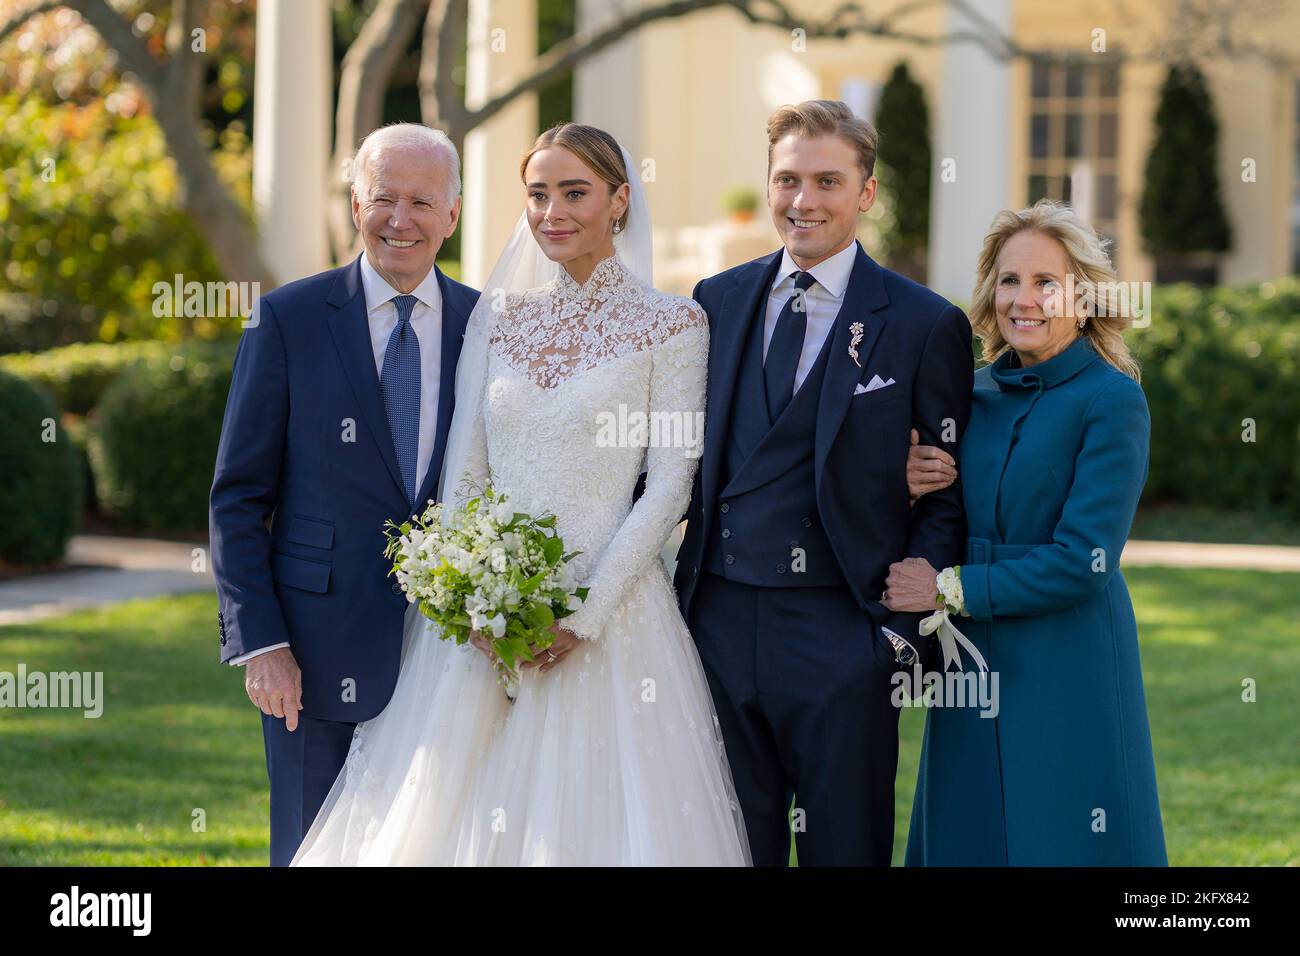 Washington, United States. 19th Nov, 2022. U.S. President Joe Biden and First Lady Jill Biden pose with granddaughter Naomi Biden Neal and her husband Peter Neal during their wedding on the South Lawn of the White House, November 19, 2022, in Washington, DC Credit: Adam Schultz/White House Photo/Alamy Live News Stock Photo